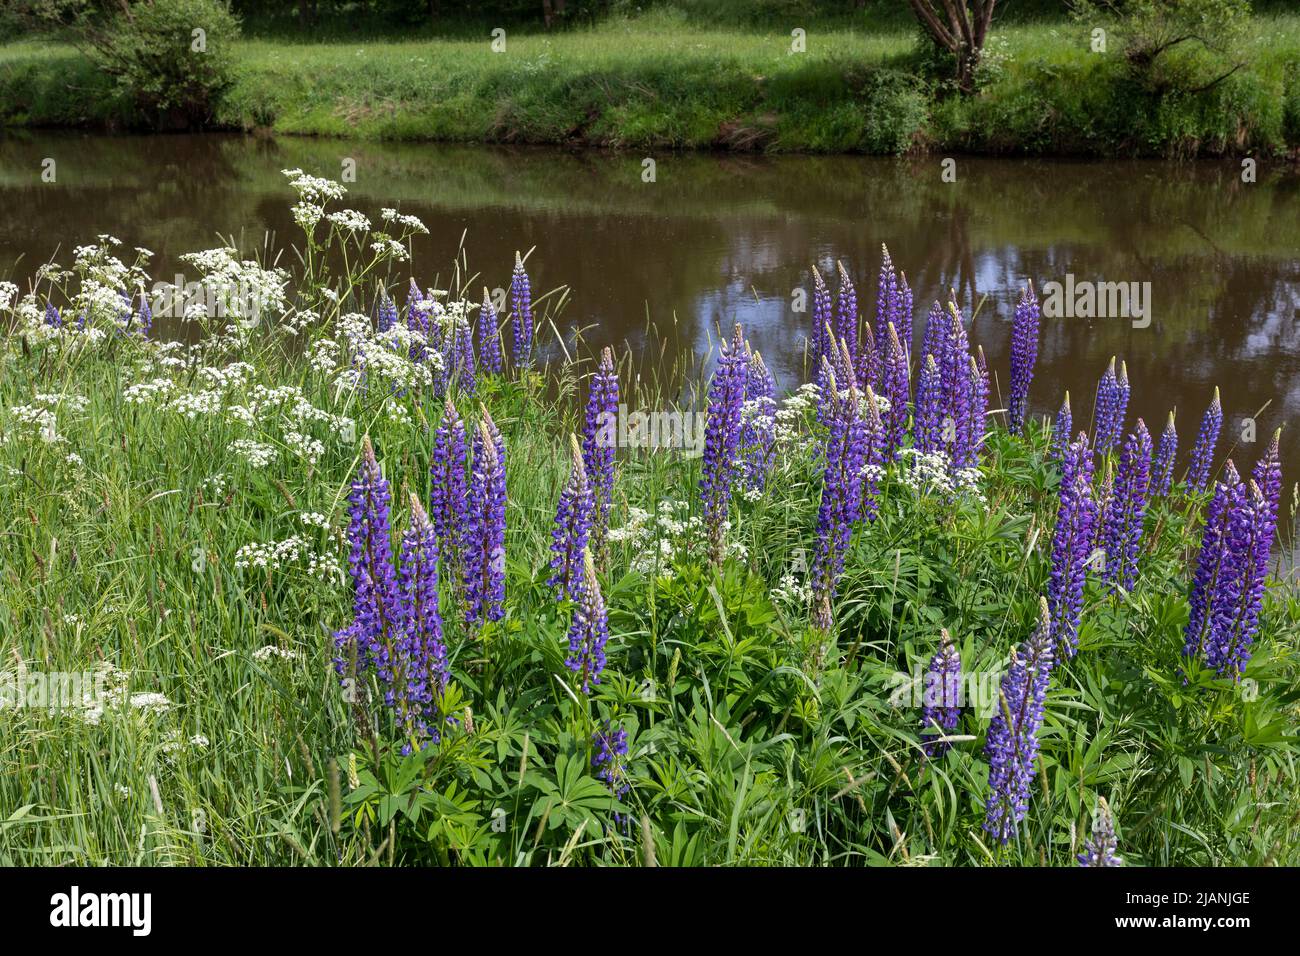 Blooming purple lupine along the river Haase near Haselune, Germany Stock Photo